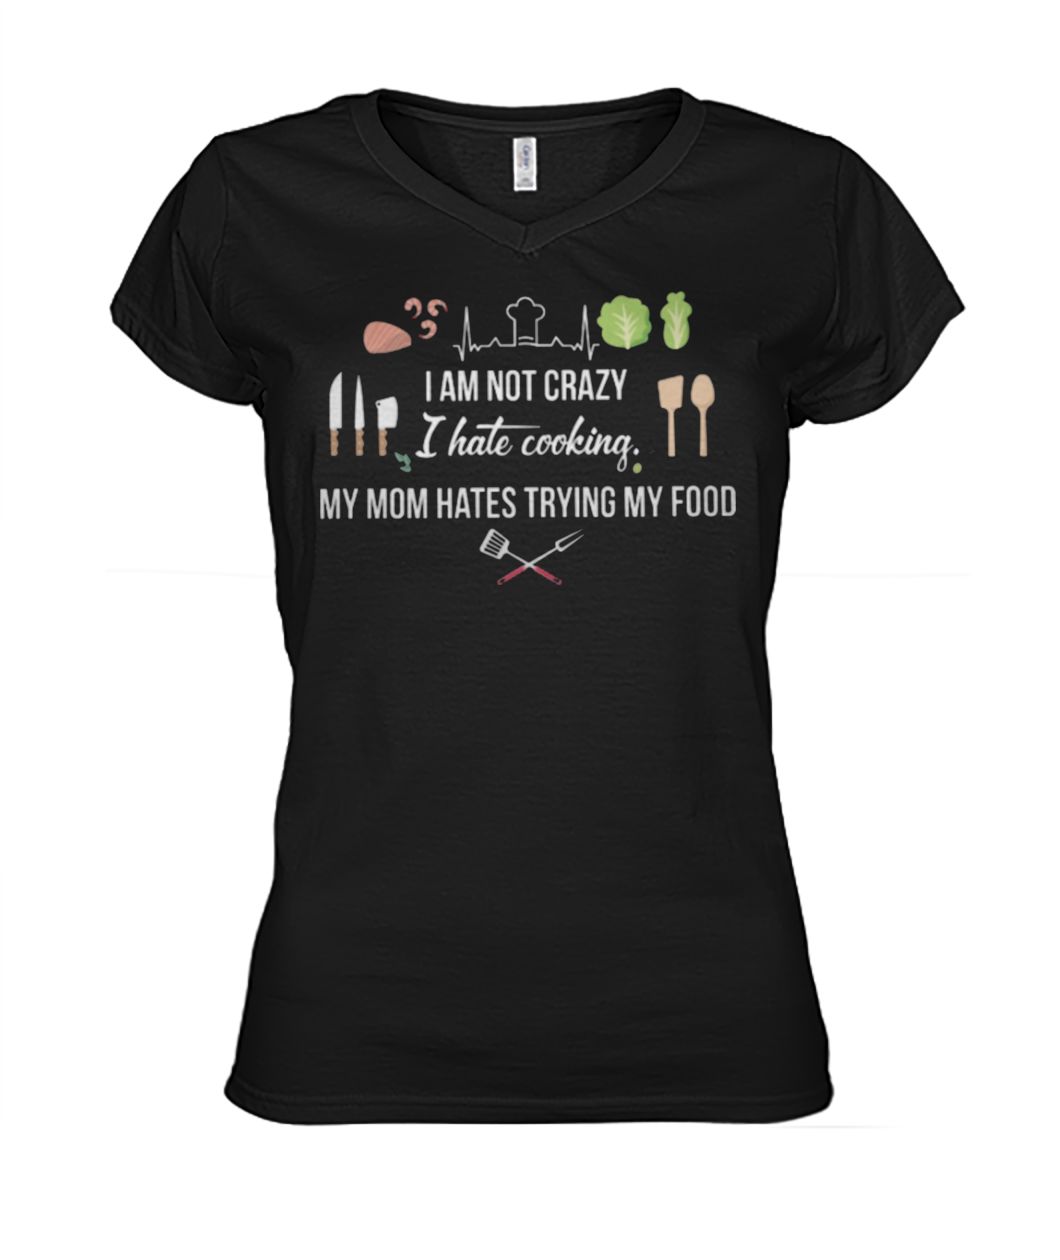 I am not crazy I hate cooking my mom hate trying my food women's v-neck